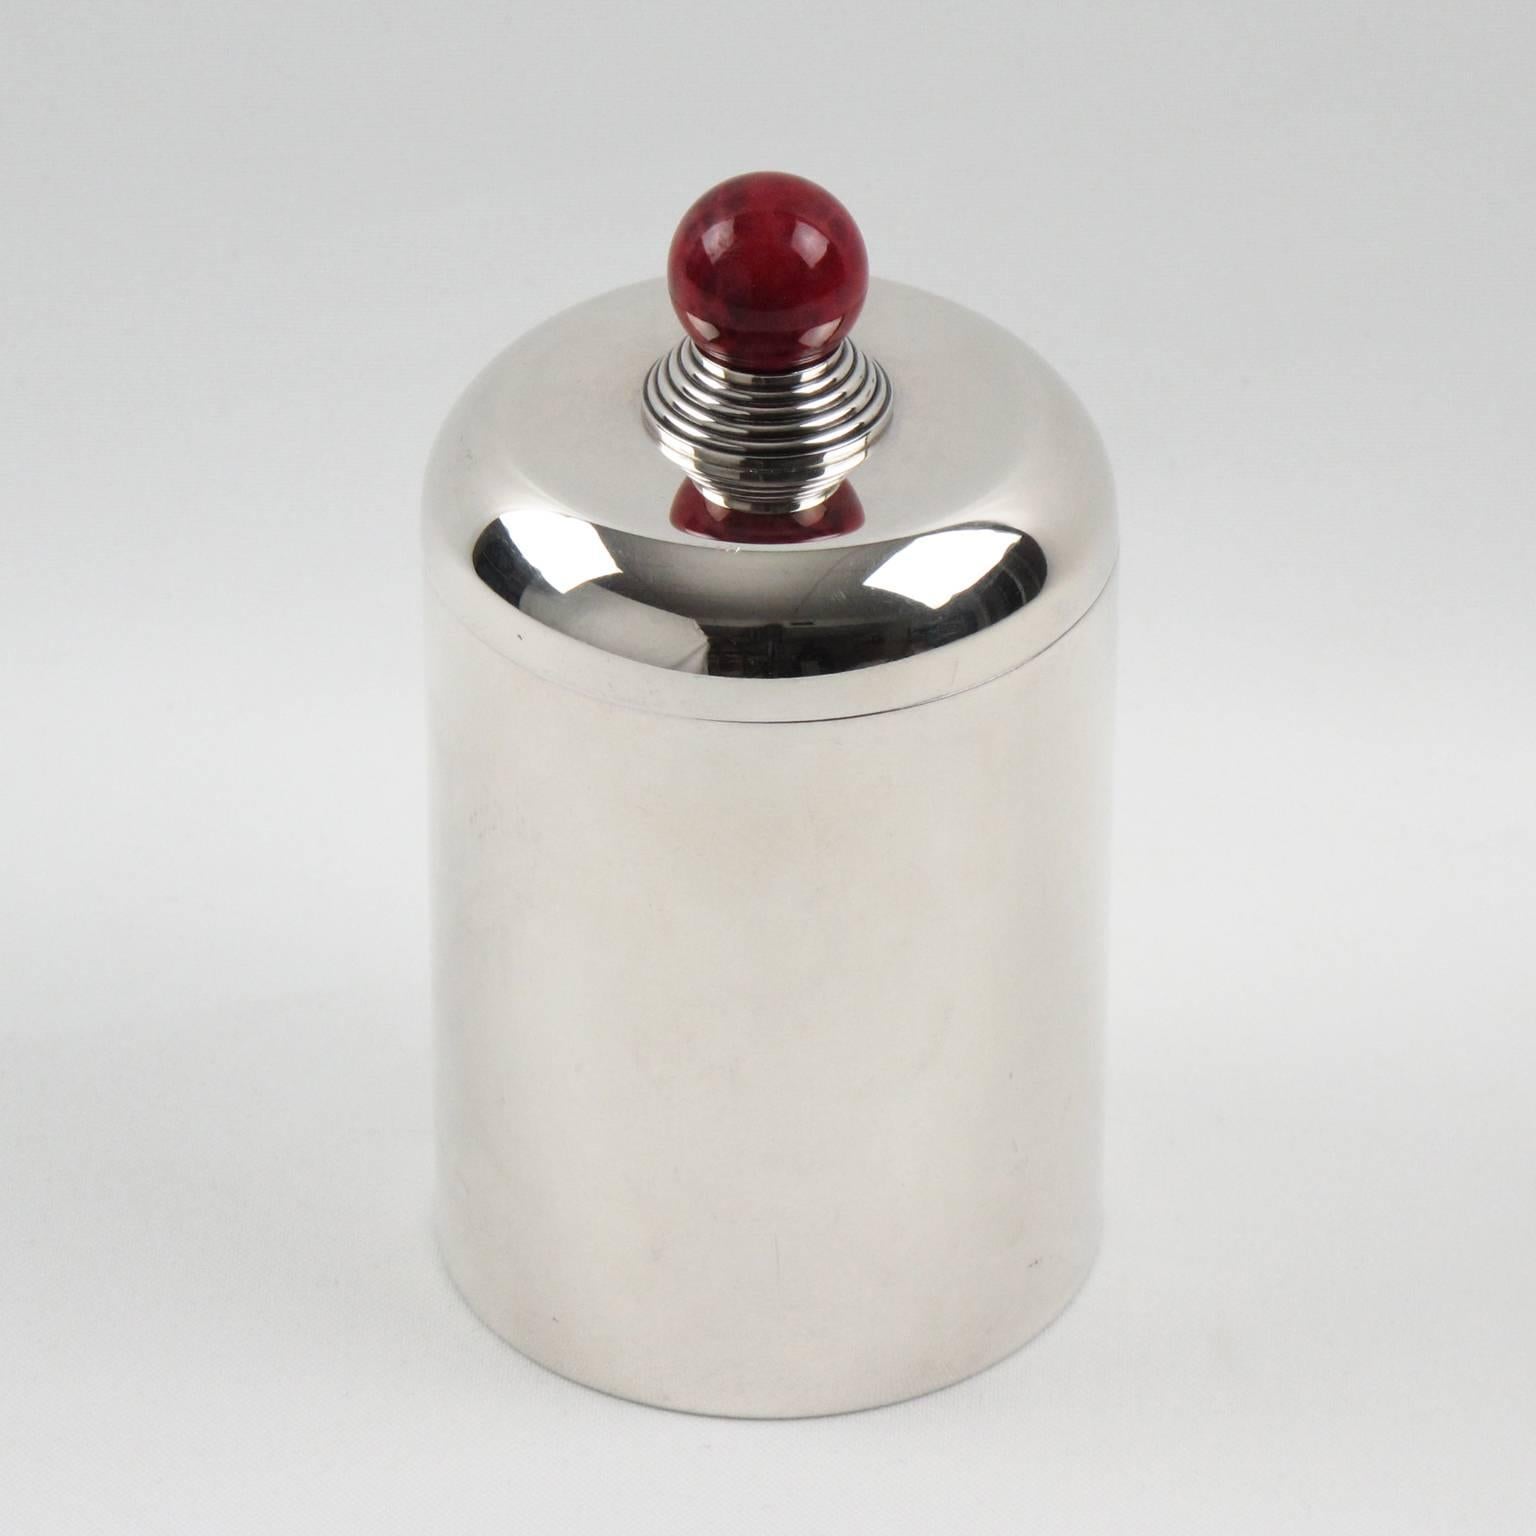 Lovely Art Deco silver plate lidded box by Jean Puiforcat, France, circa 1930s. Minimalist round shape with lid topped with red agate stone finial. Elegant vanity accessory. Hallmark underside 